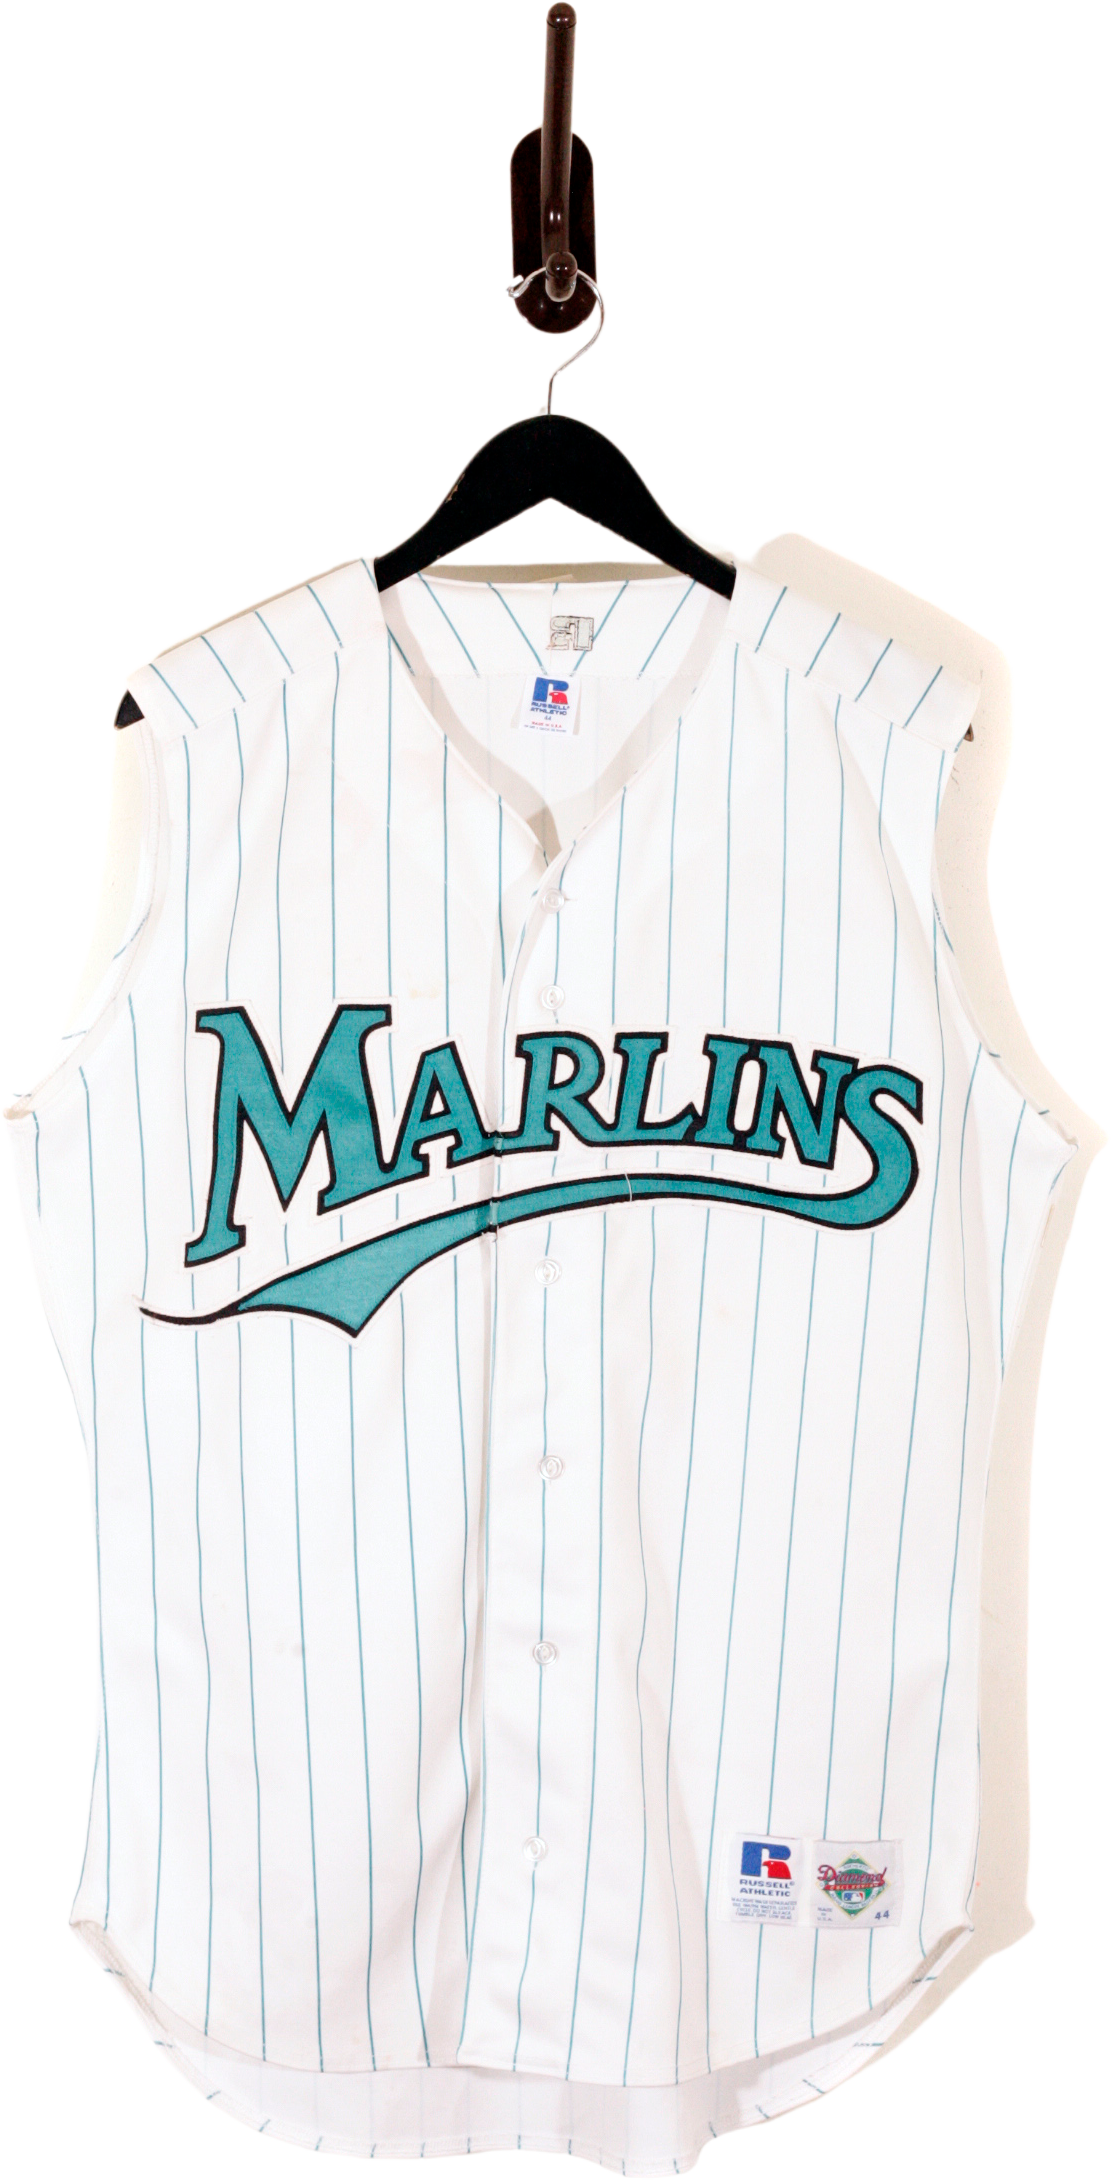 Russell Athletic Florida Marlins Jersey